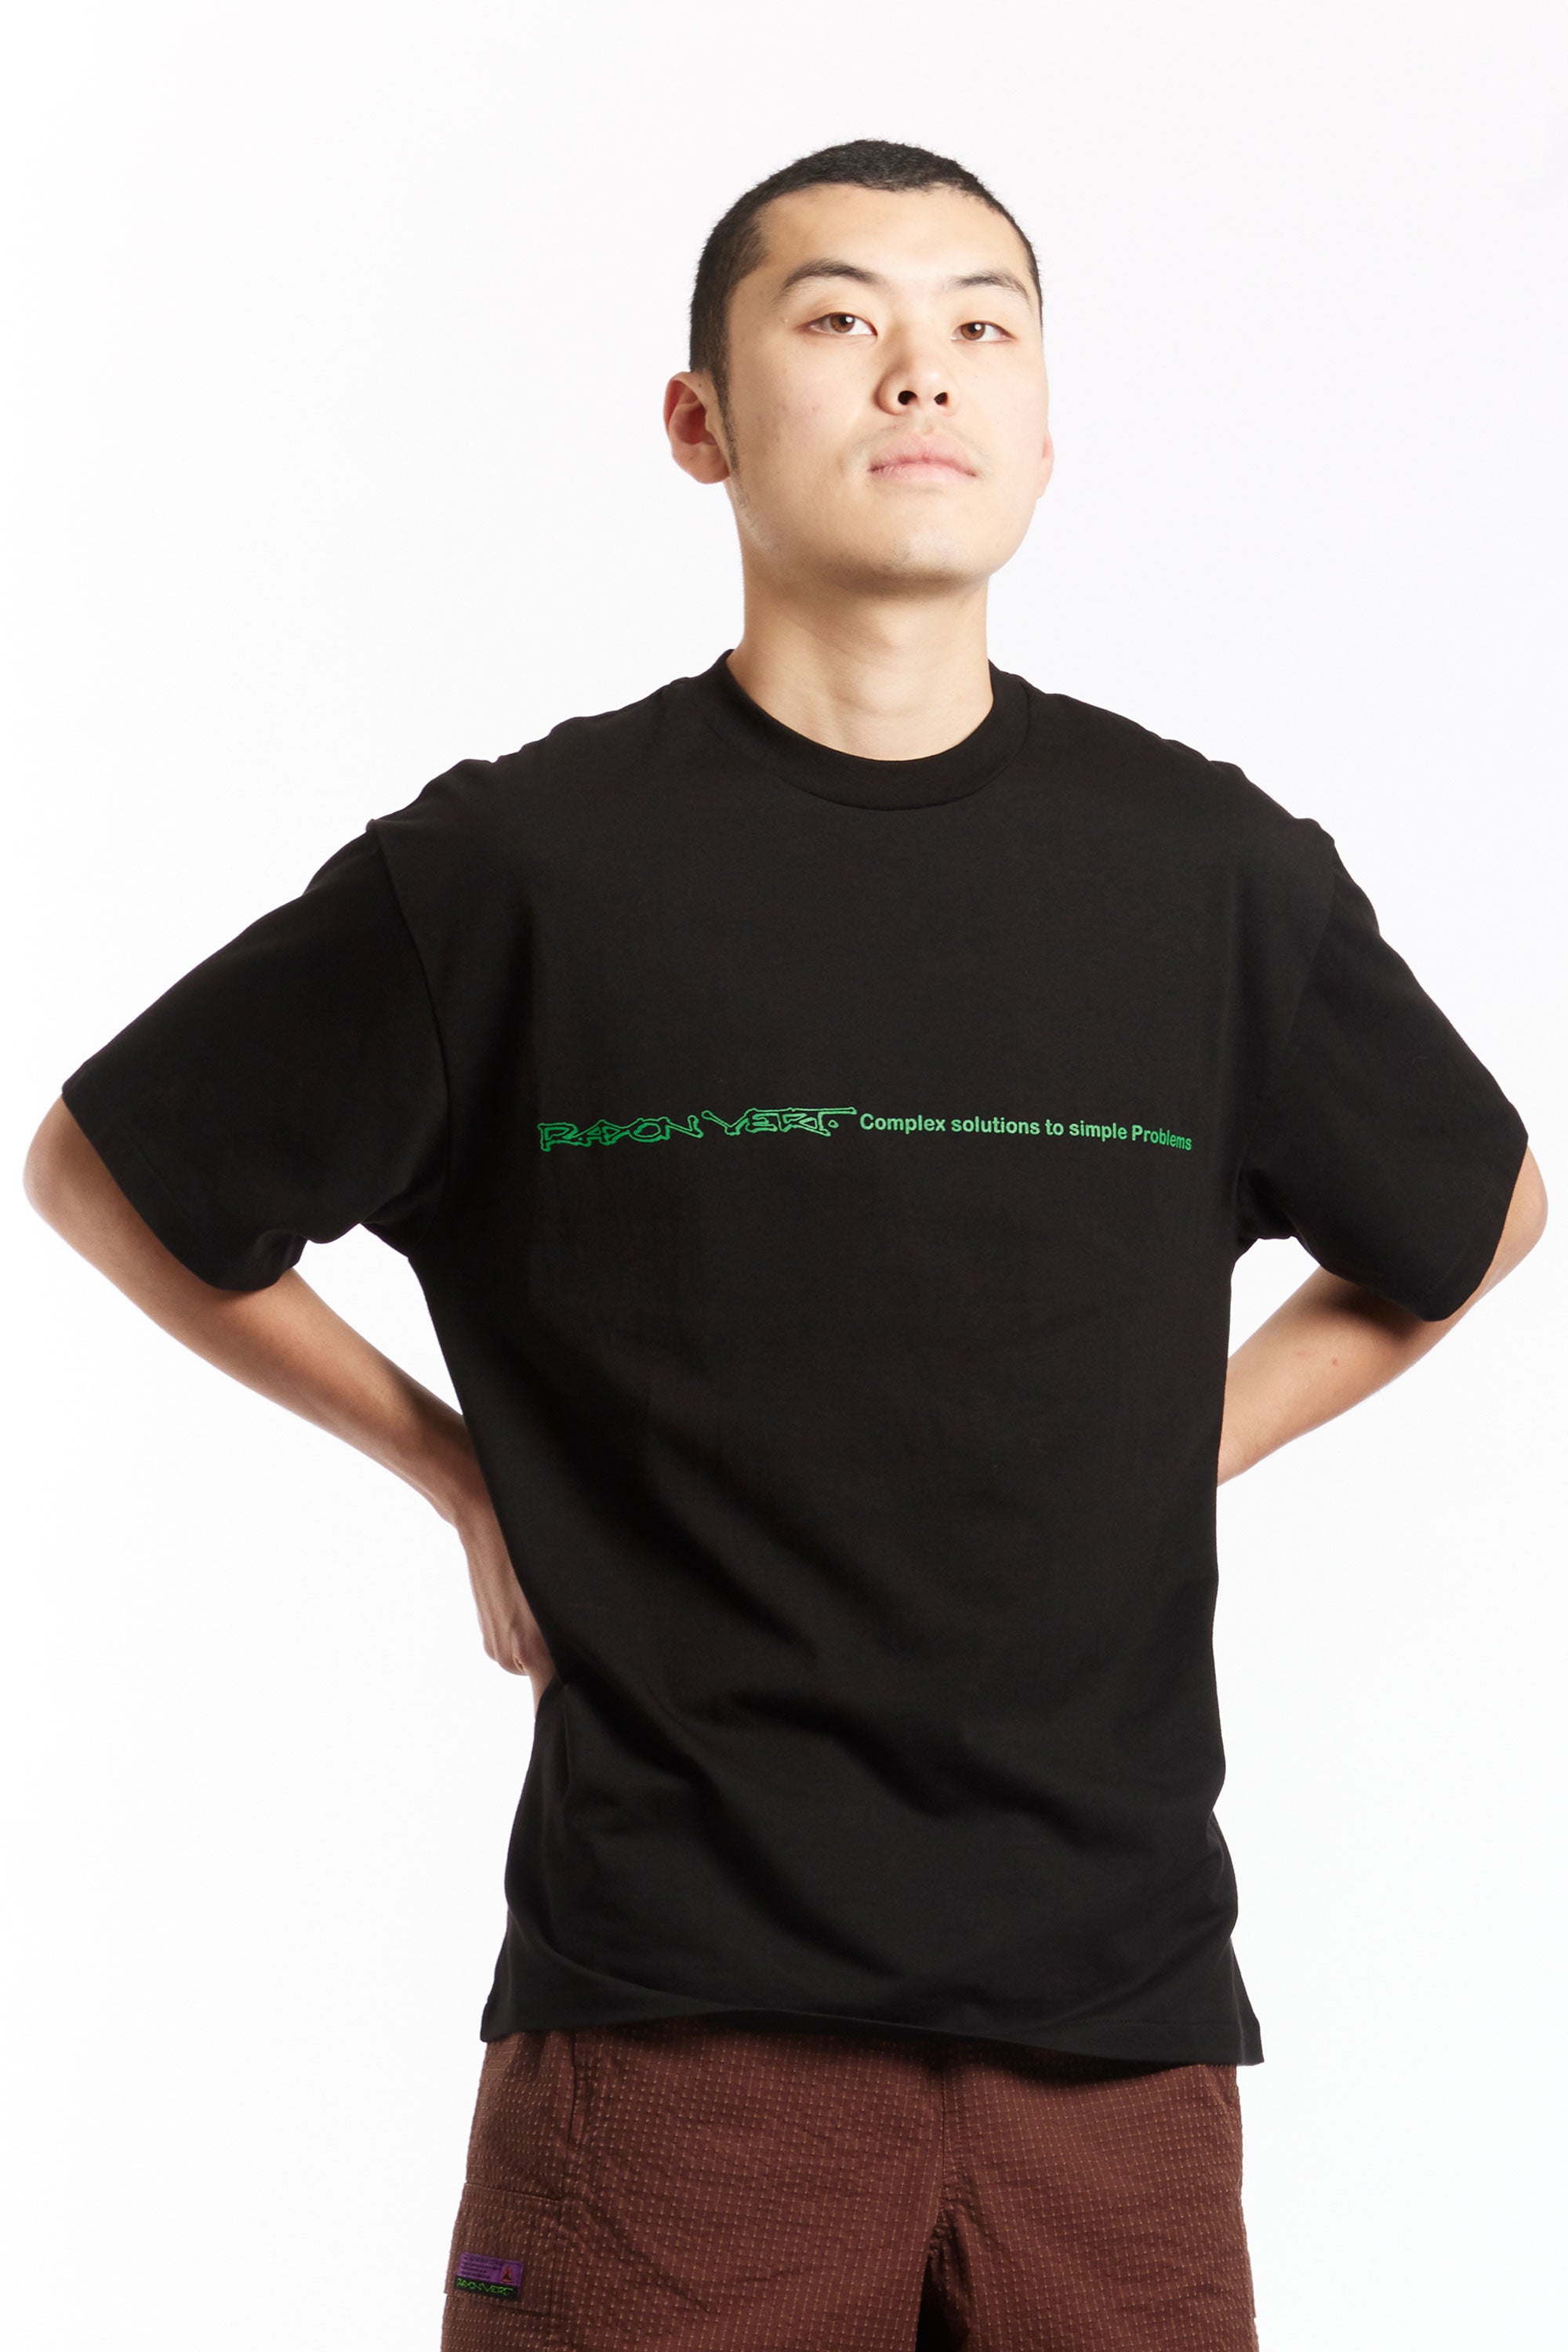 The RAYON VERT - MENHIR T-SHIRT  available online with global shipping, and in PAM Stores Melbourne and Sydney.